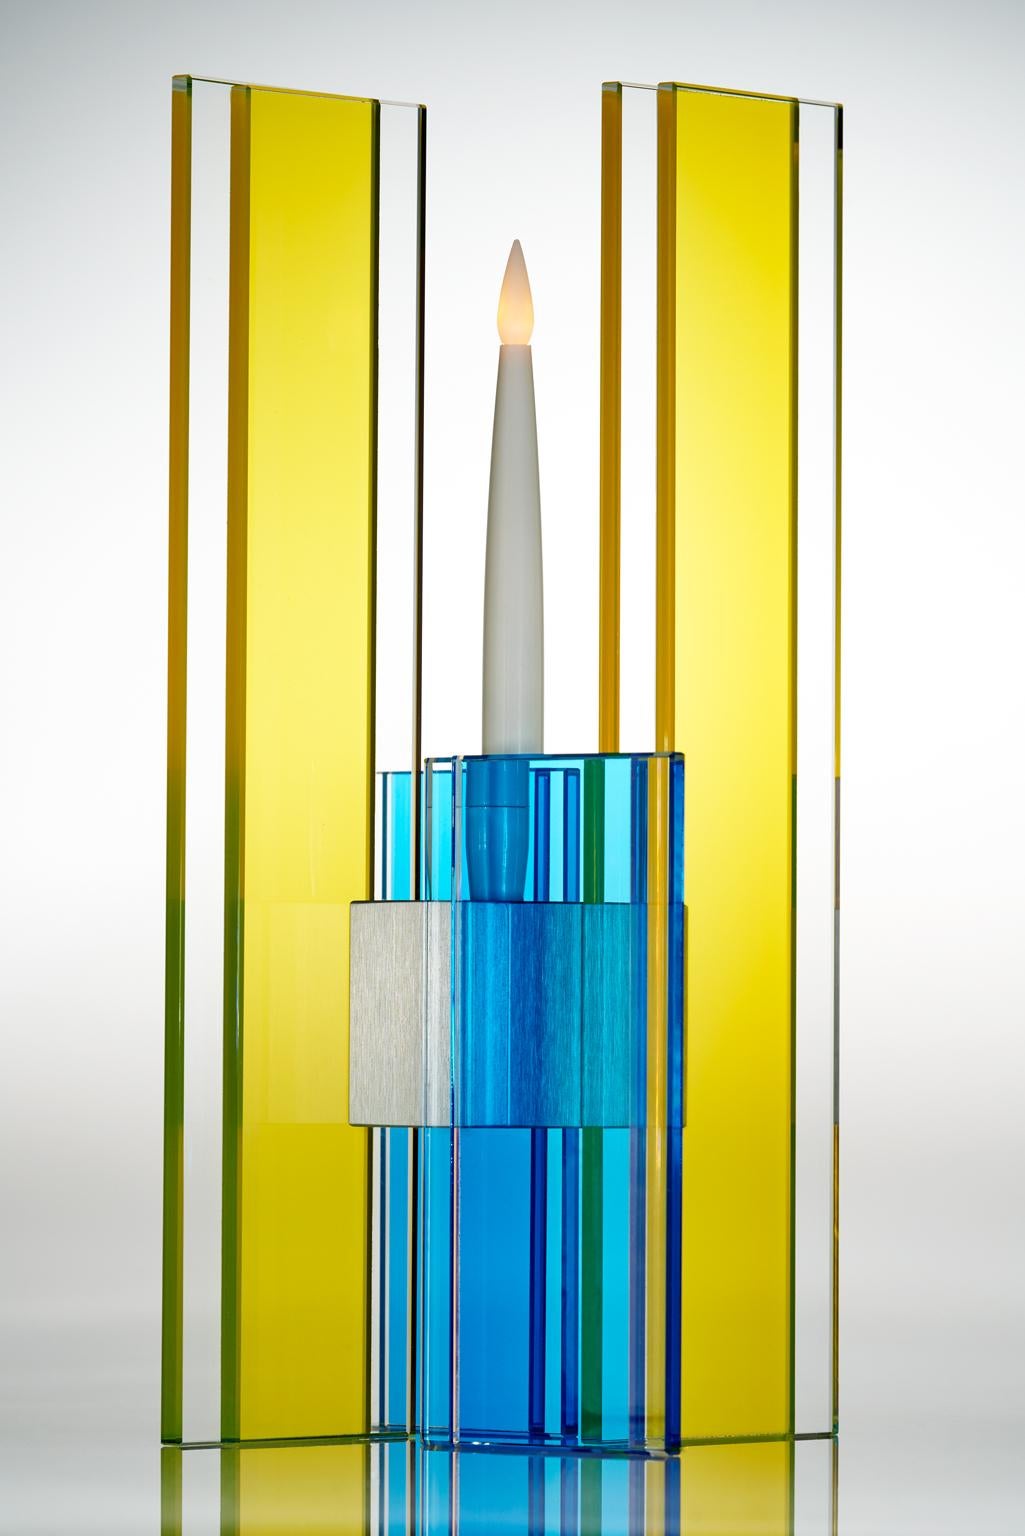 This polished glass candleholder from the Deco series is designed by world renowned glass artist, Sidney Hutter. With 40 years of experience in the contemporary glass and fine art world, Sidney now creates illuminated designs for the home. Create a